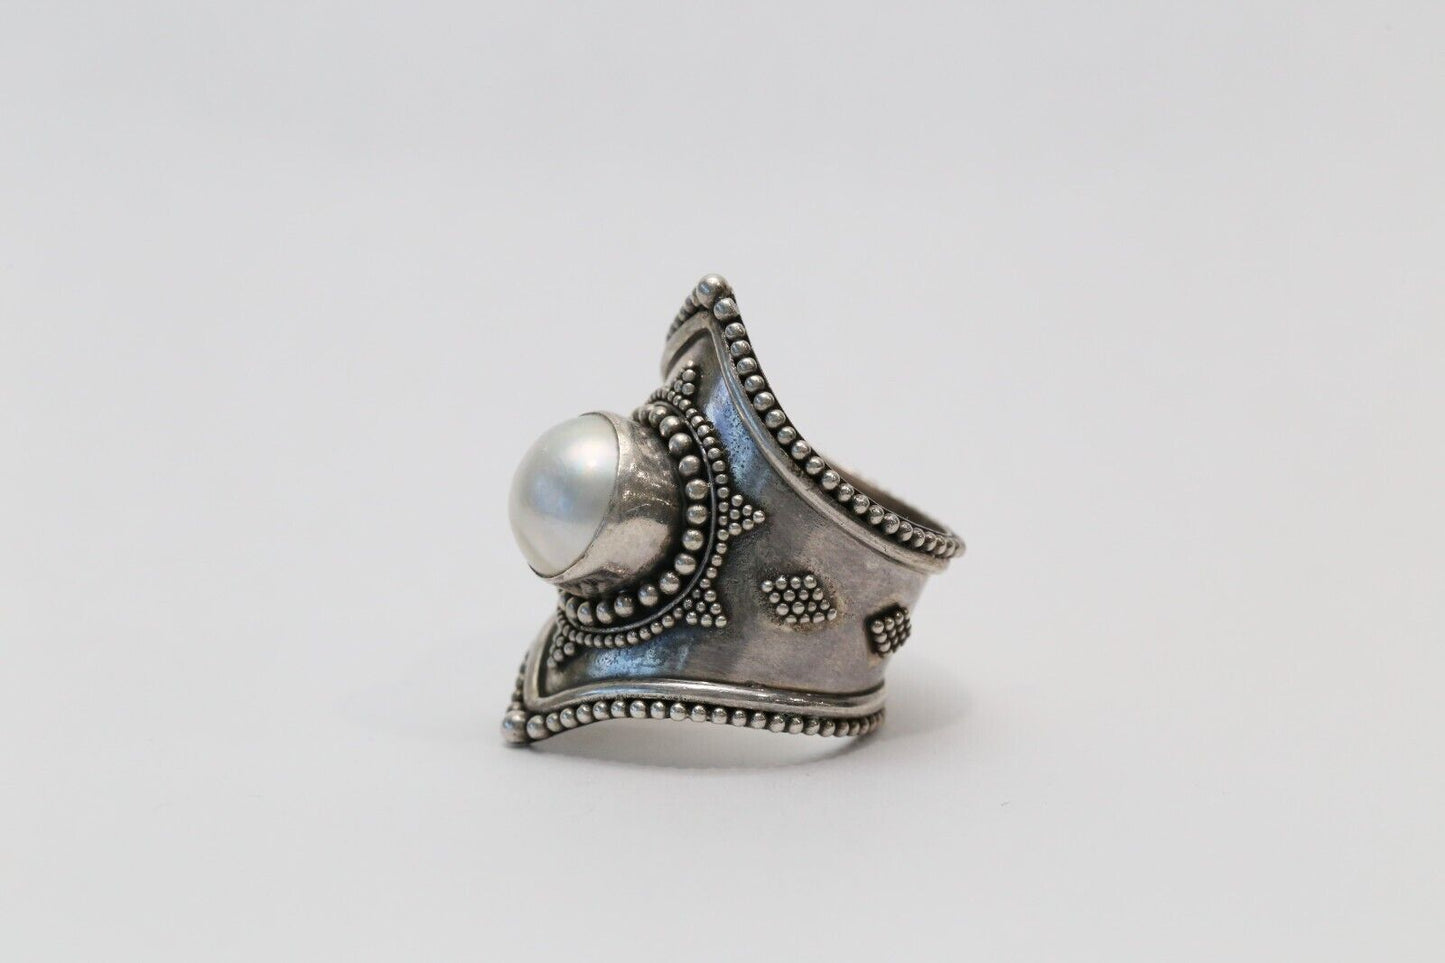 Vintage Sterling Silver Faux Pearl Ring, Size 9 - 8.9g